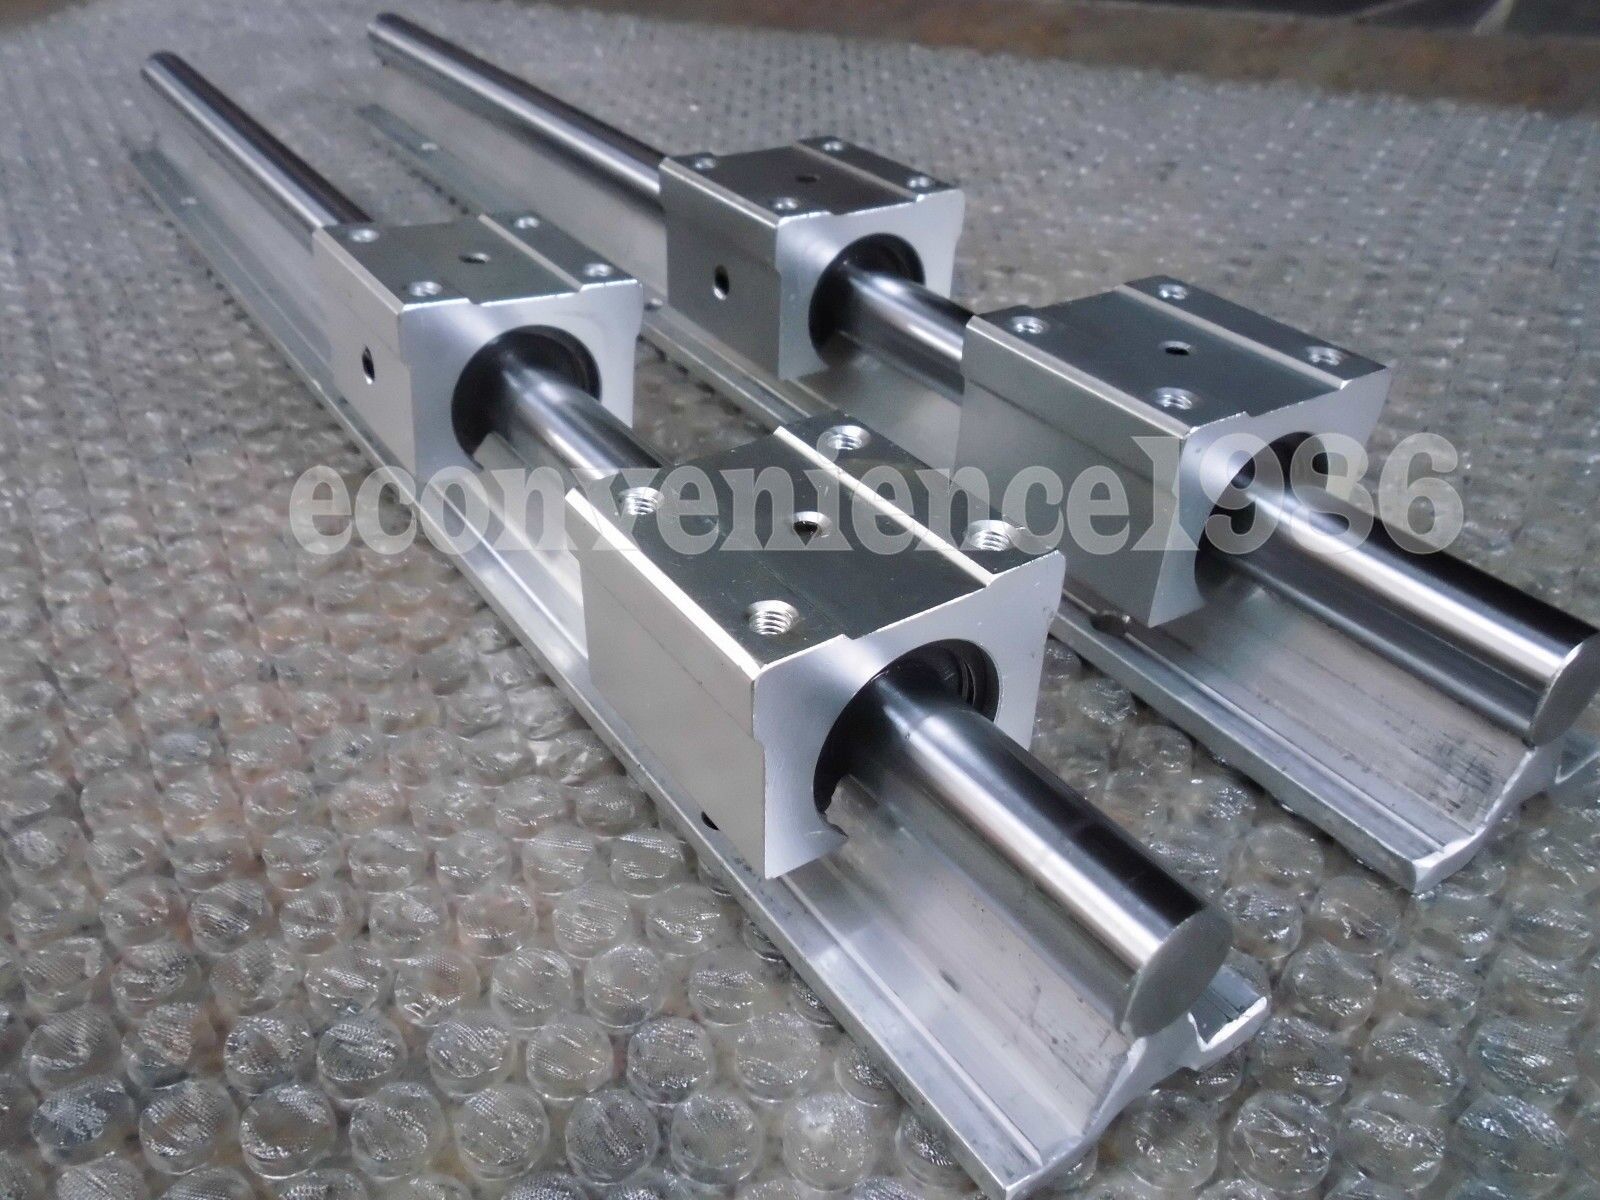 2 x SBR20-2438 mm( 8 Ft long ) jointed Linear Raill Support&4 SBR20UU Bearing